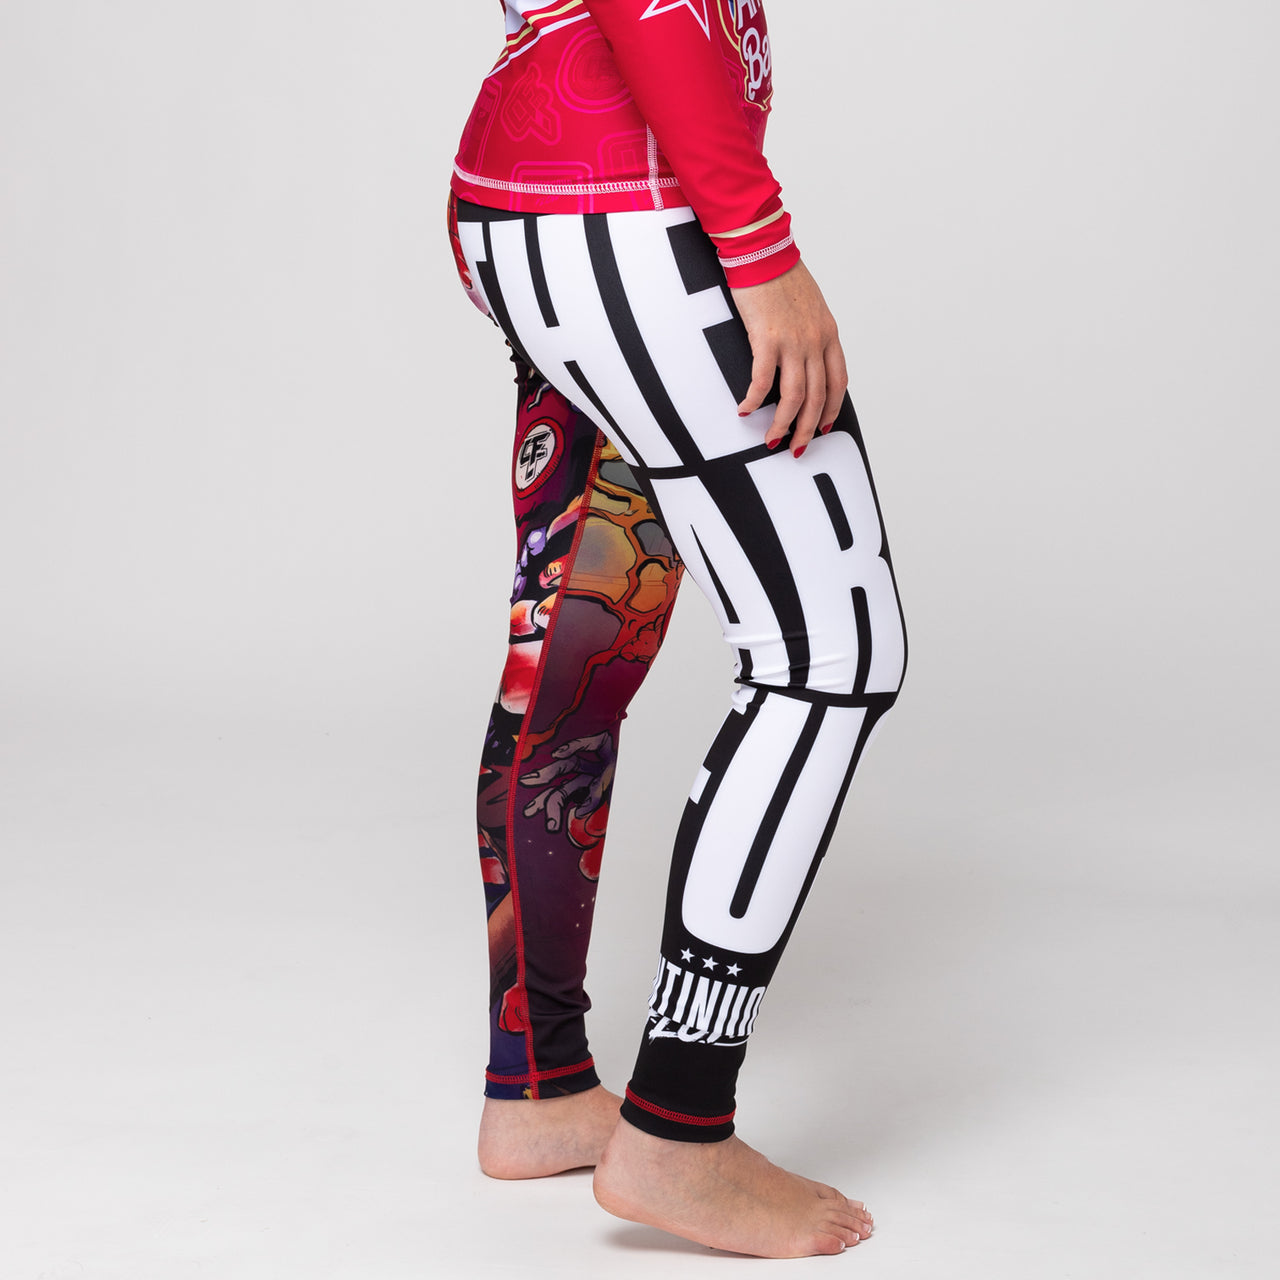 Continuous Flow "For The Darce Of Us" Women's Spats